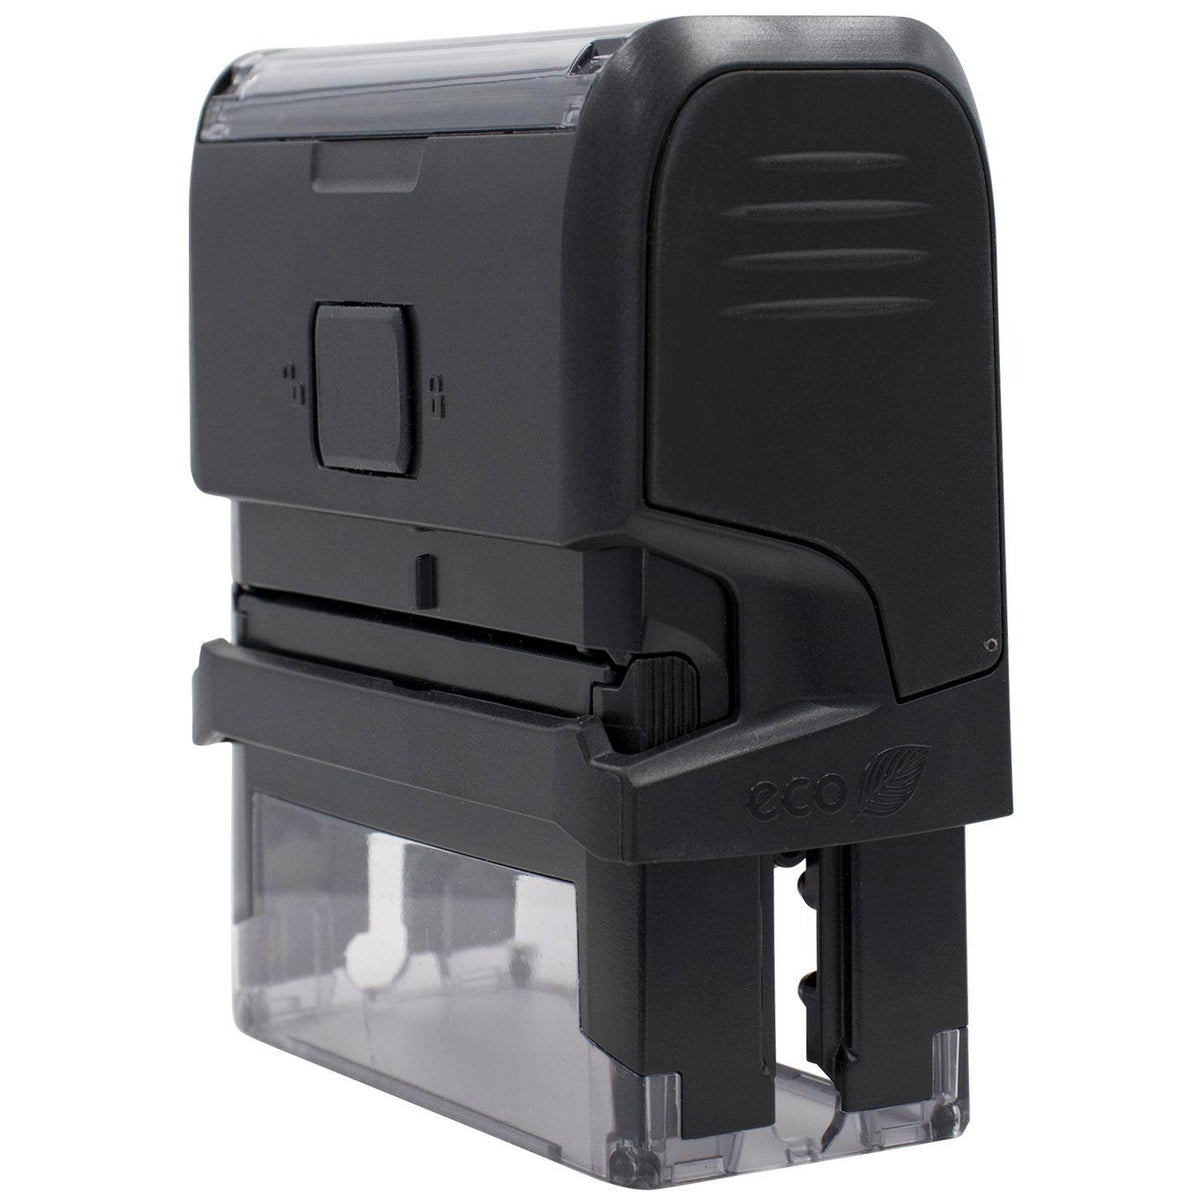 Side View of Large Self Inking Attorneys Copy Stamp at an Angle